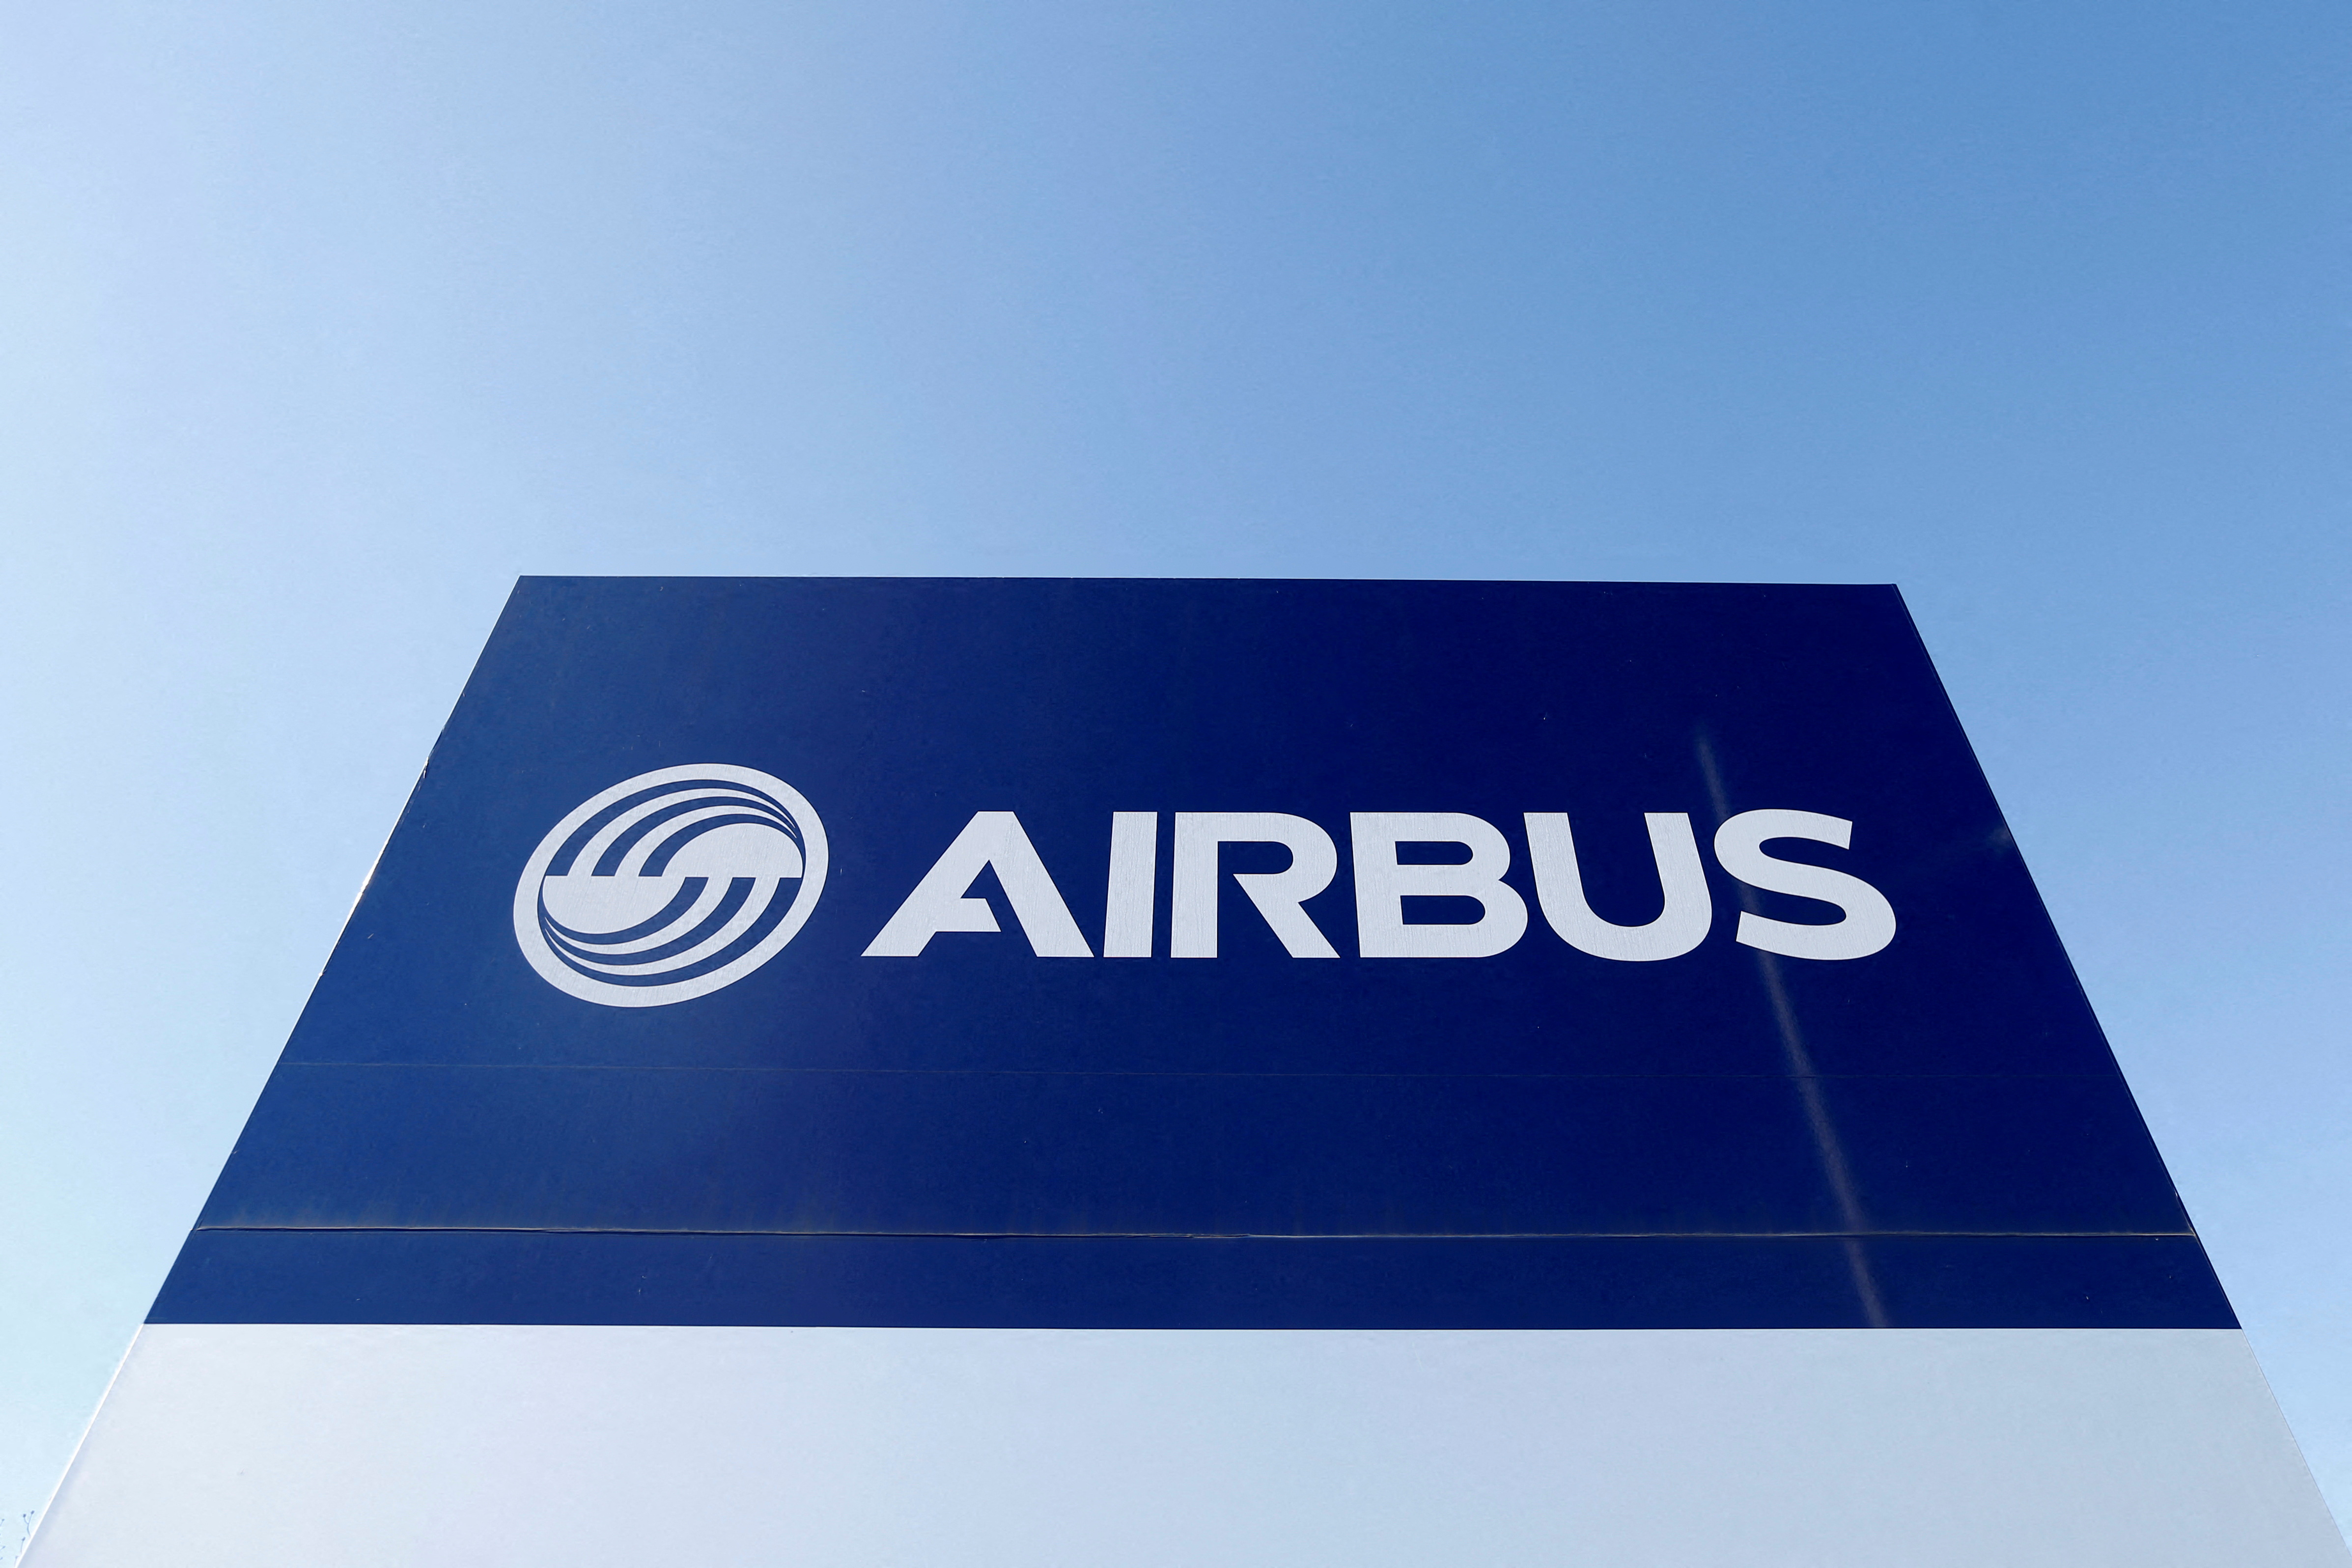 FILE PHOTO: A logo of Airbus is seen at Airbus headquarters in Blagnac